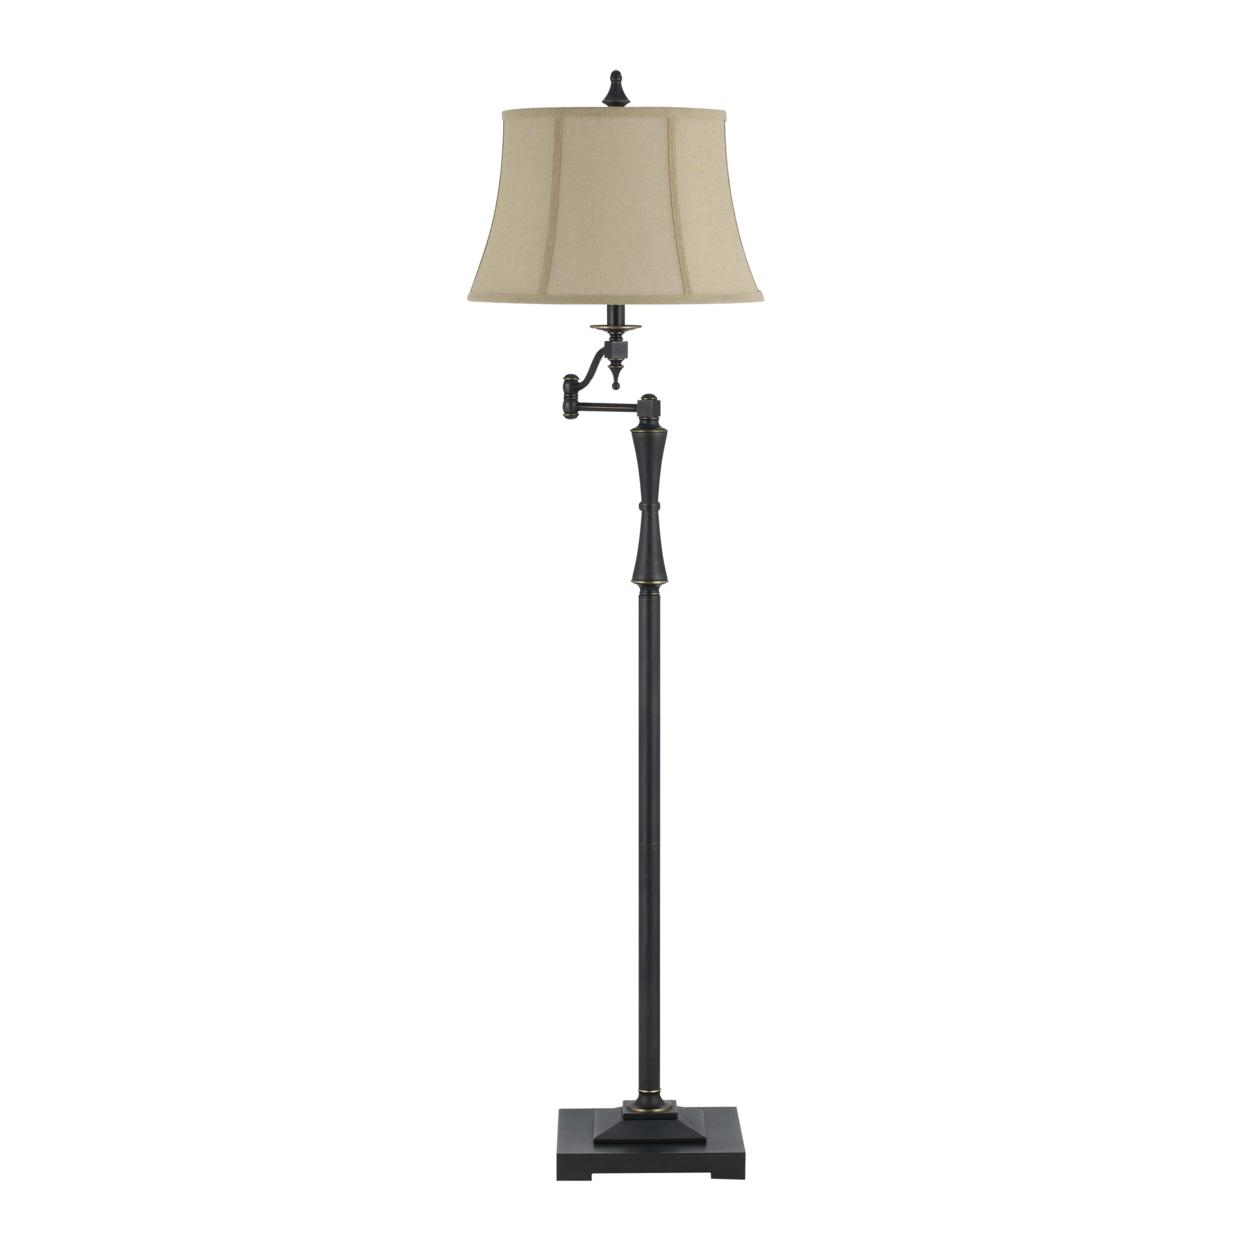 Metal Body Floor Lamp With Fabric Tapered Bell Shade, Beige And Black- Saltoro Sherpi